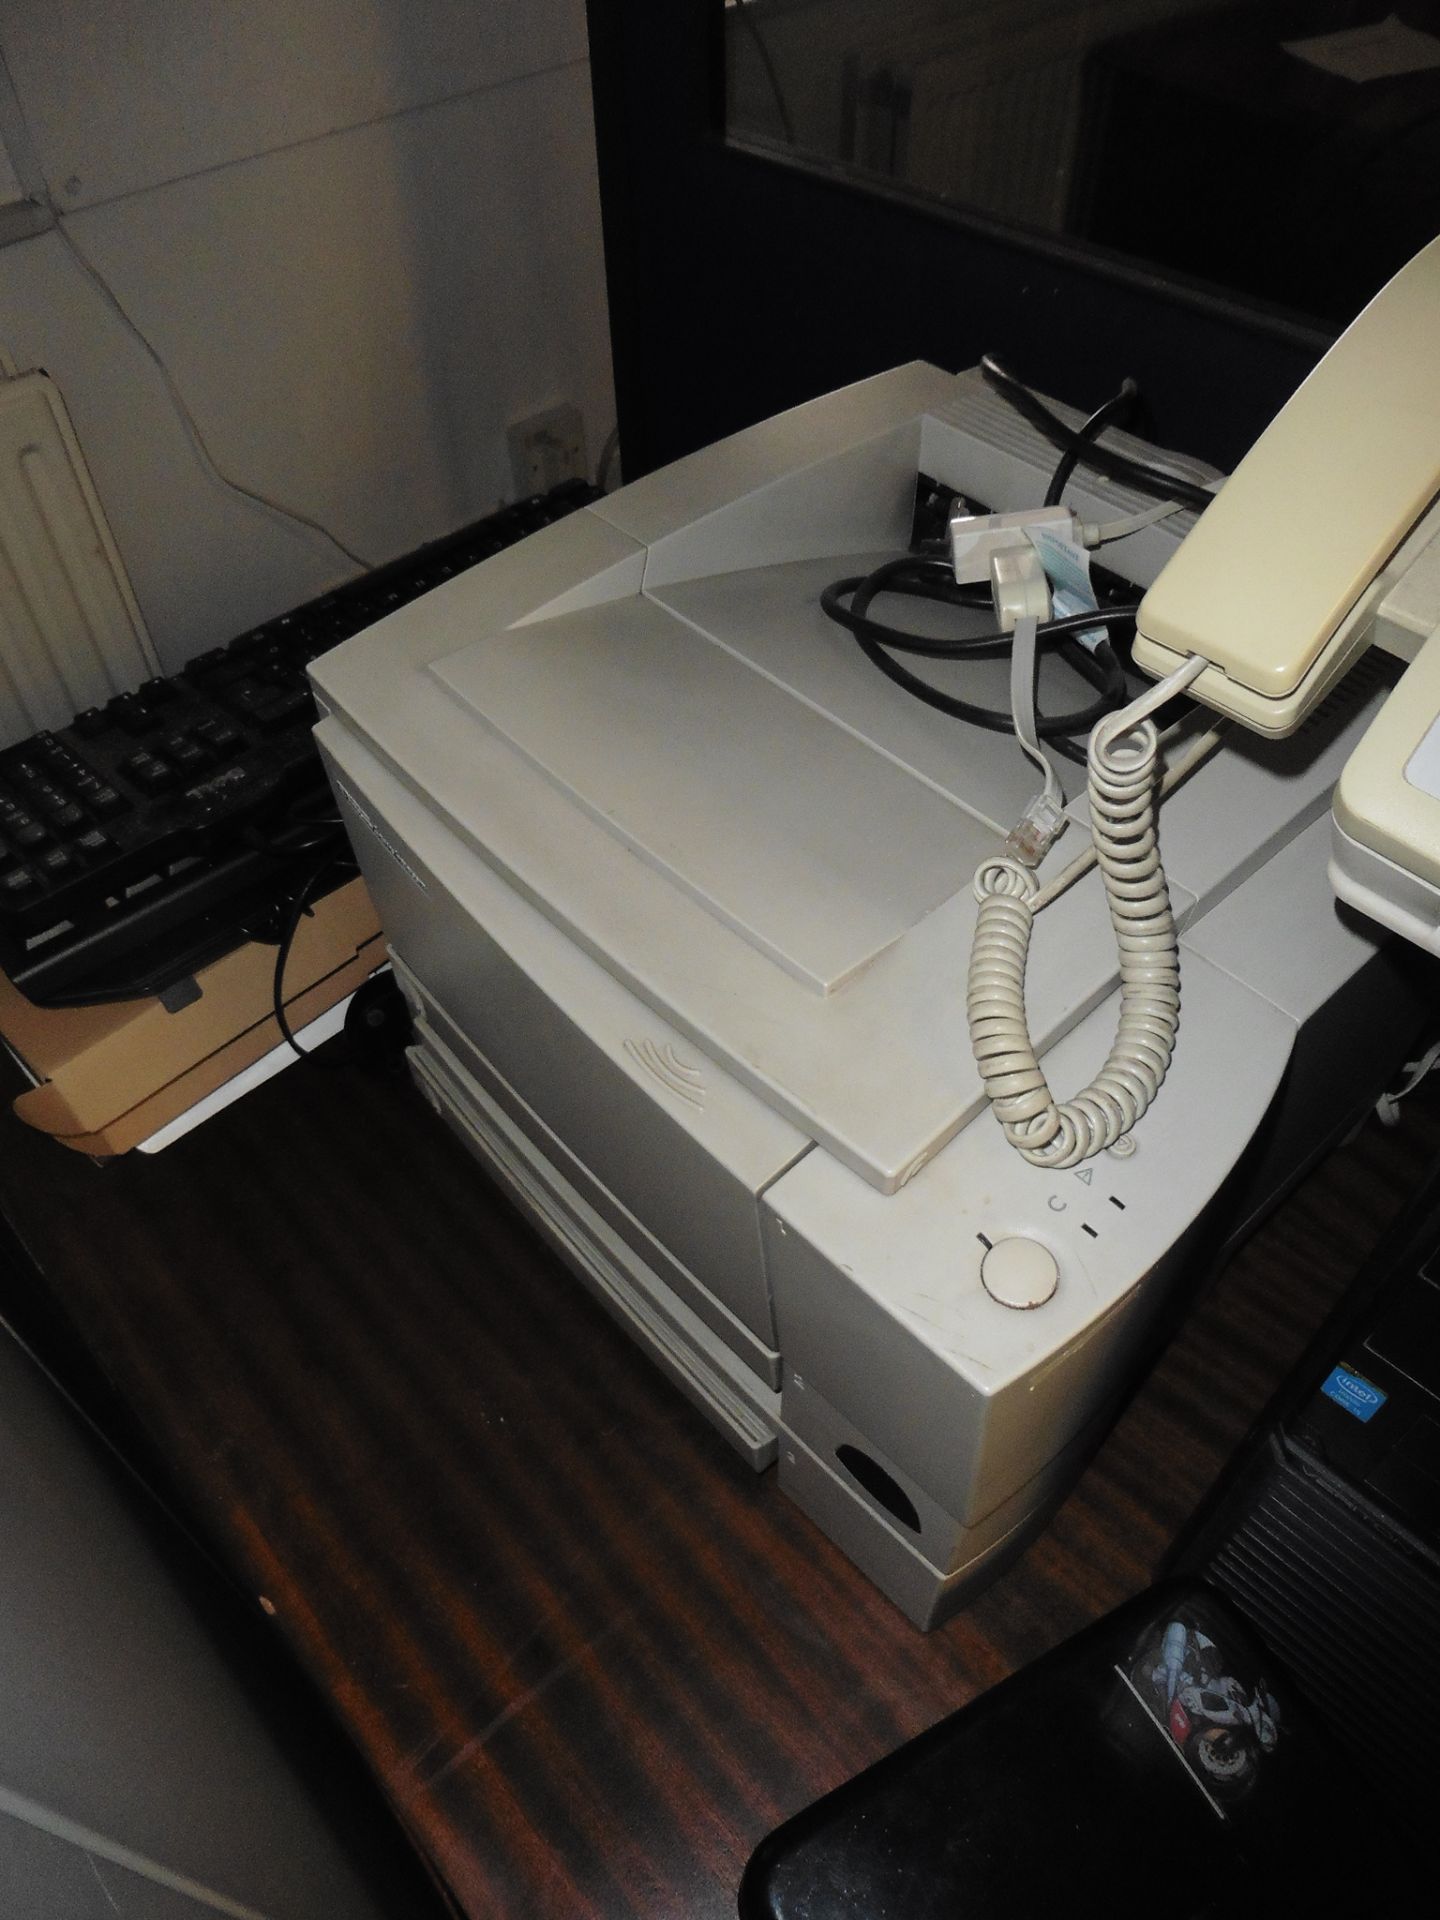 Miscellaneous office equipment including overhead projector, extension leads, fax machine, etc - Image 2 of 2